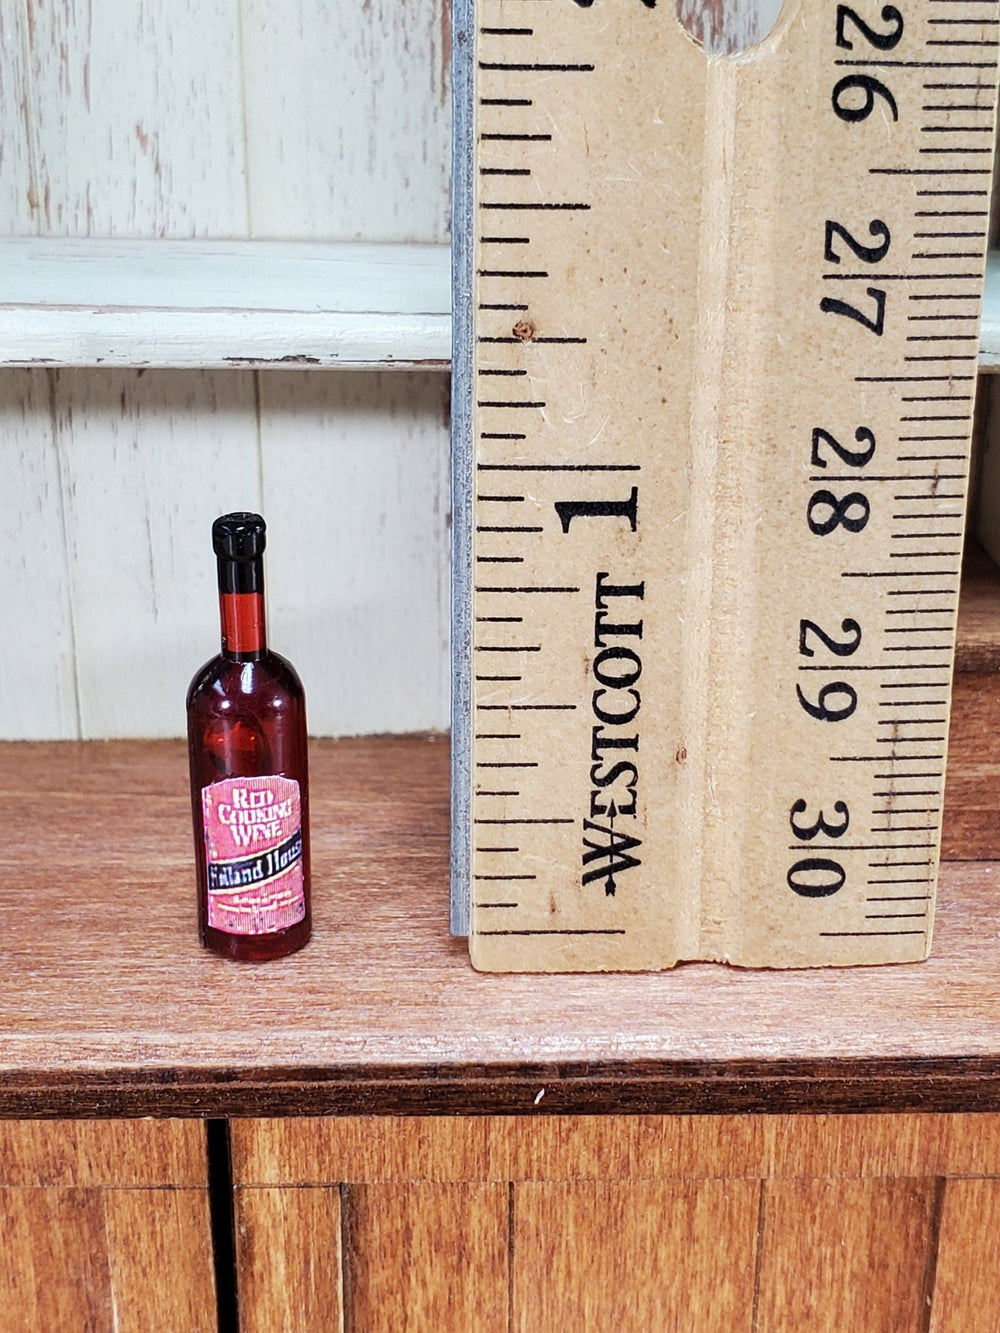 Dollhouse Red Cooking Wine Bottle 1:12 Scale Miniature Kitchen 1" Tall - Miniature Crush